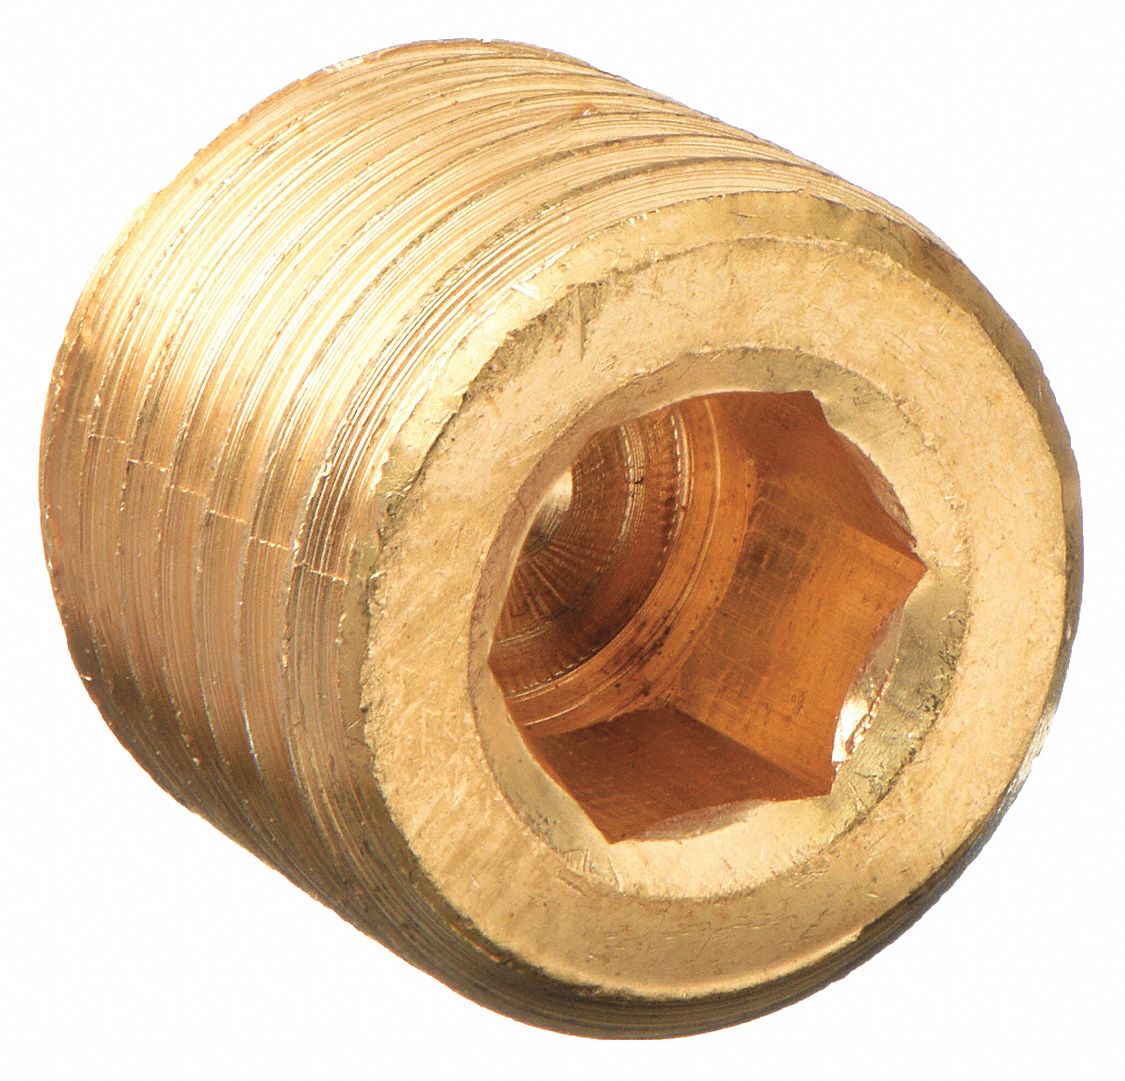 Brass, 1/2 in Fitting Pipe Size, Hex Head Plug - 6AZA8